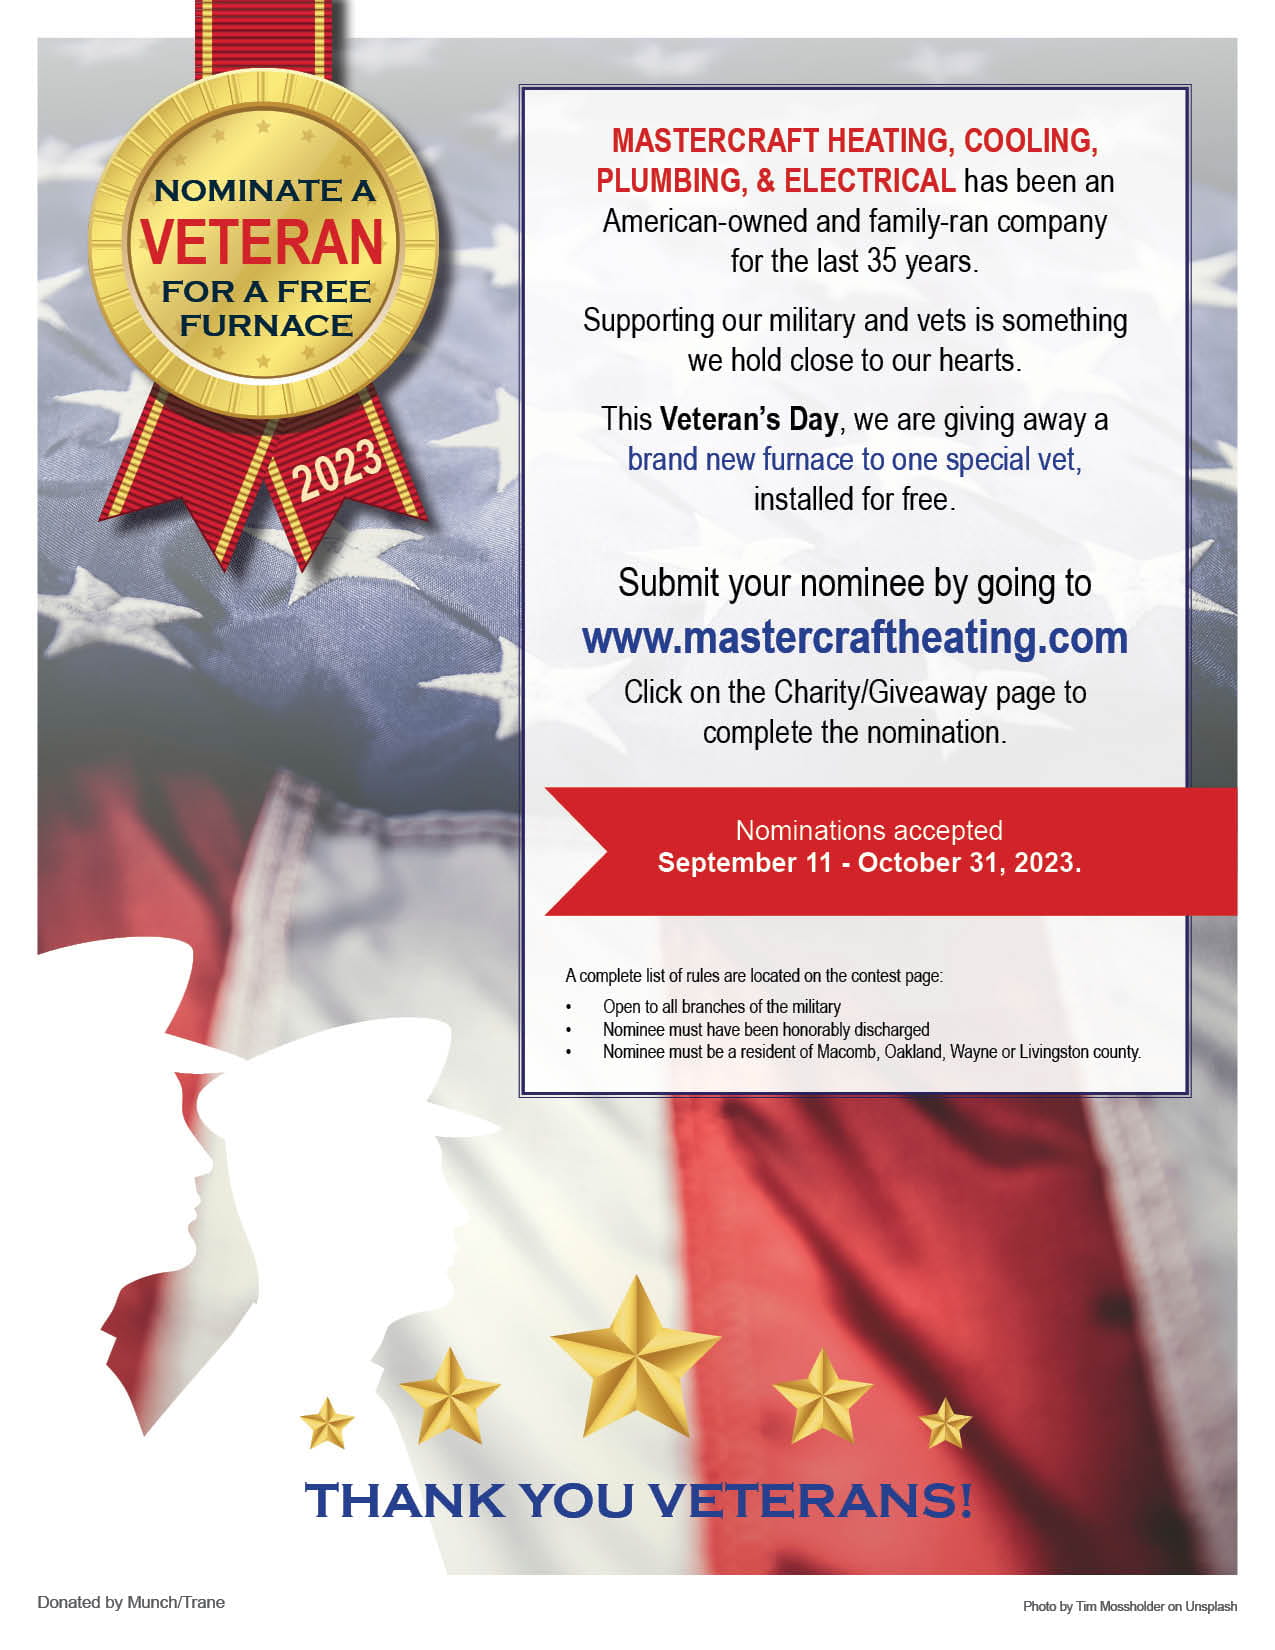 Nominate a Veteran For a Free Furnace